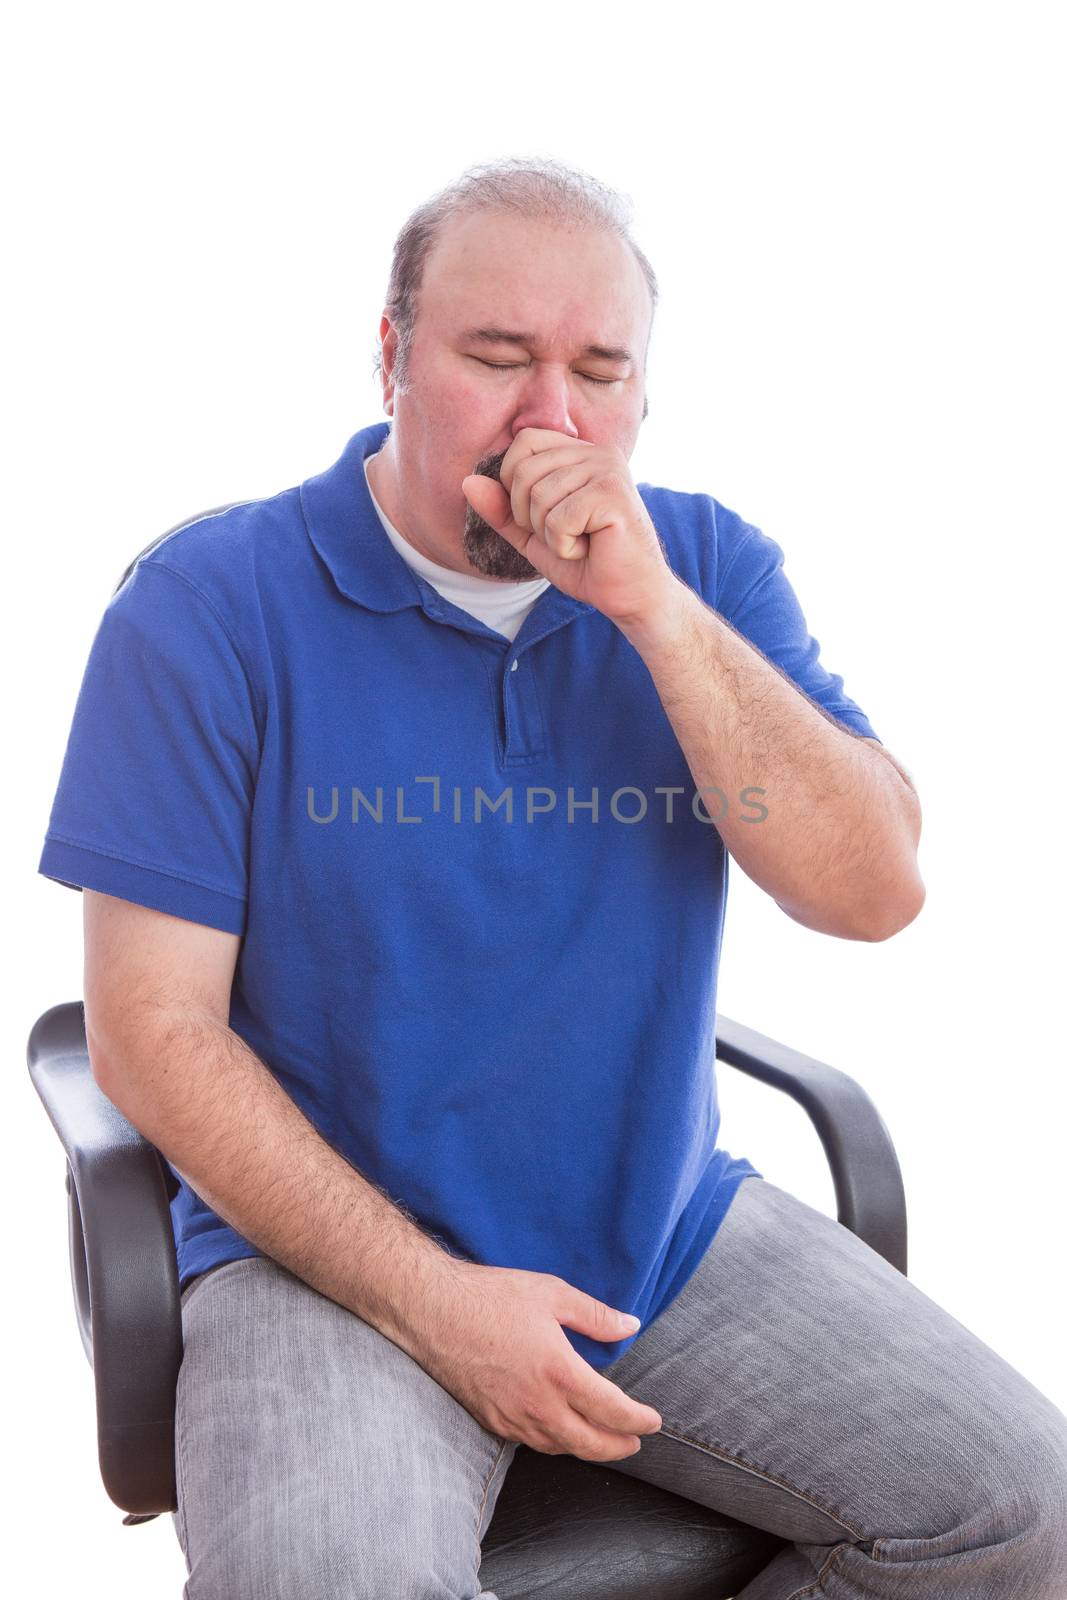 Close up Sick Bearded Man in Blue Shirt Sitting on a Single Chair Suffering From Cough. Isolated on White Background.